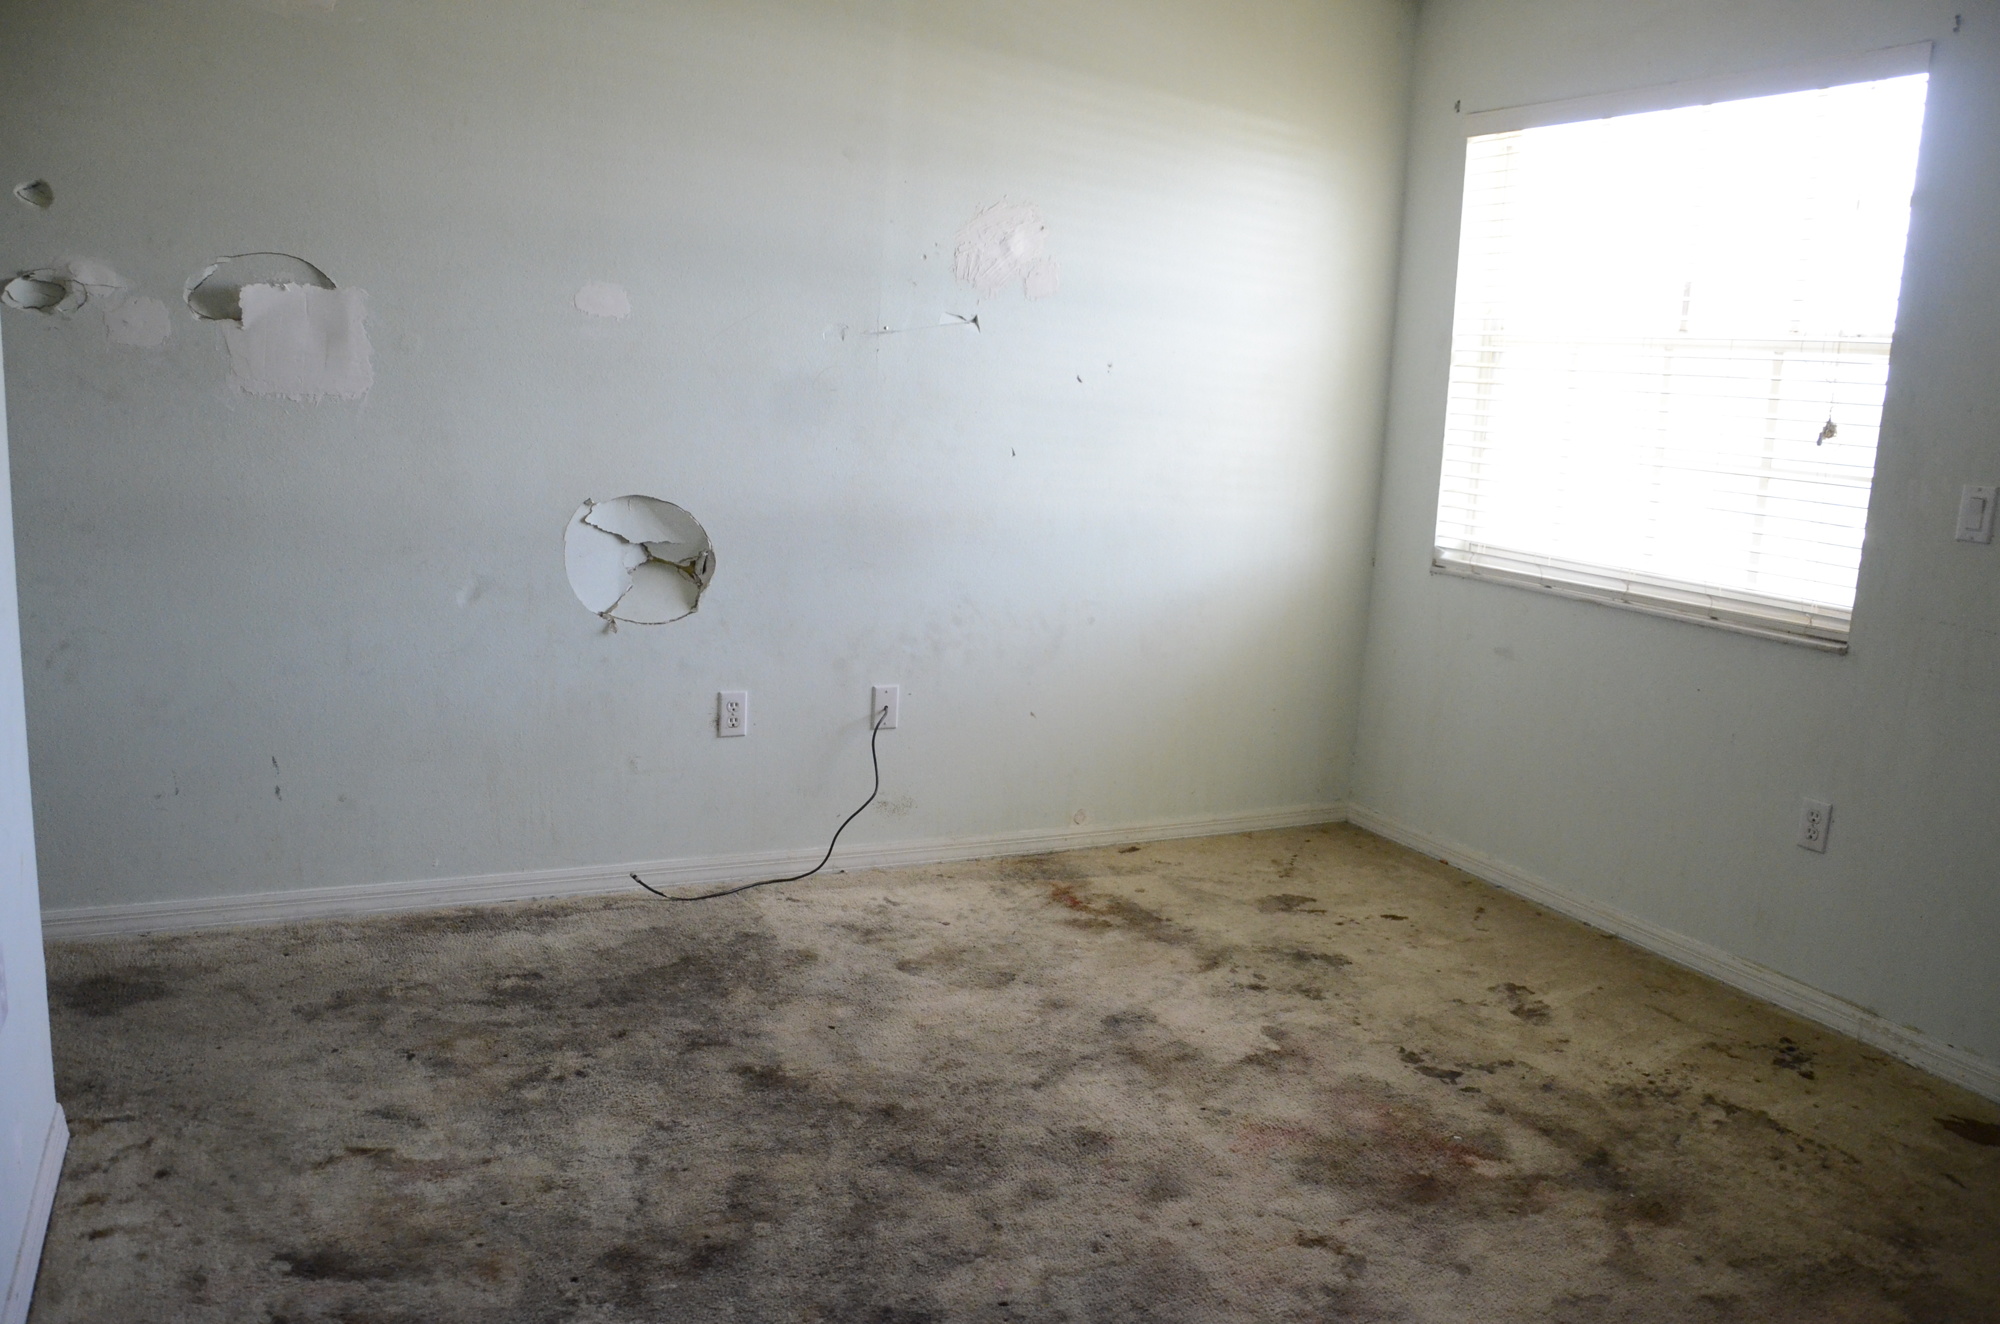 The carpet throughout the house is covered in a myriad of stains. Upstairs, large holes have been punched into the bedrooms, and the doors were ripped of the hinges.